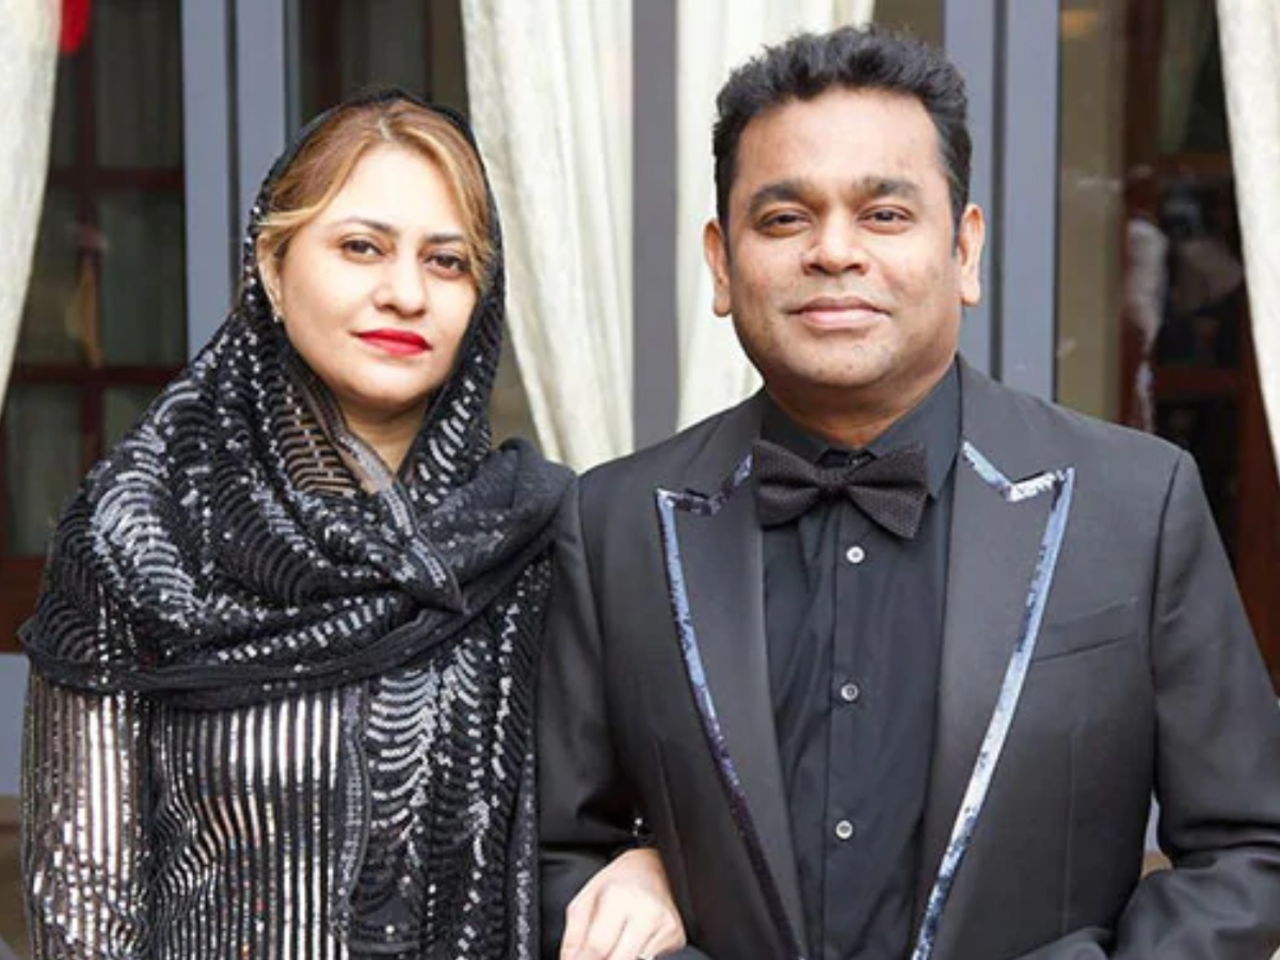 AR Rahman asks his wife to speak in Tamil and not Hindi at a public event Tamil Movie News